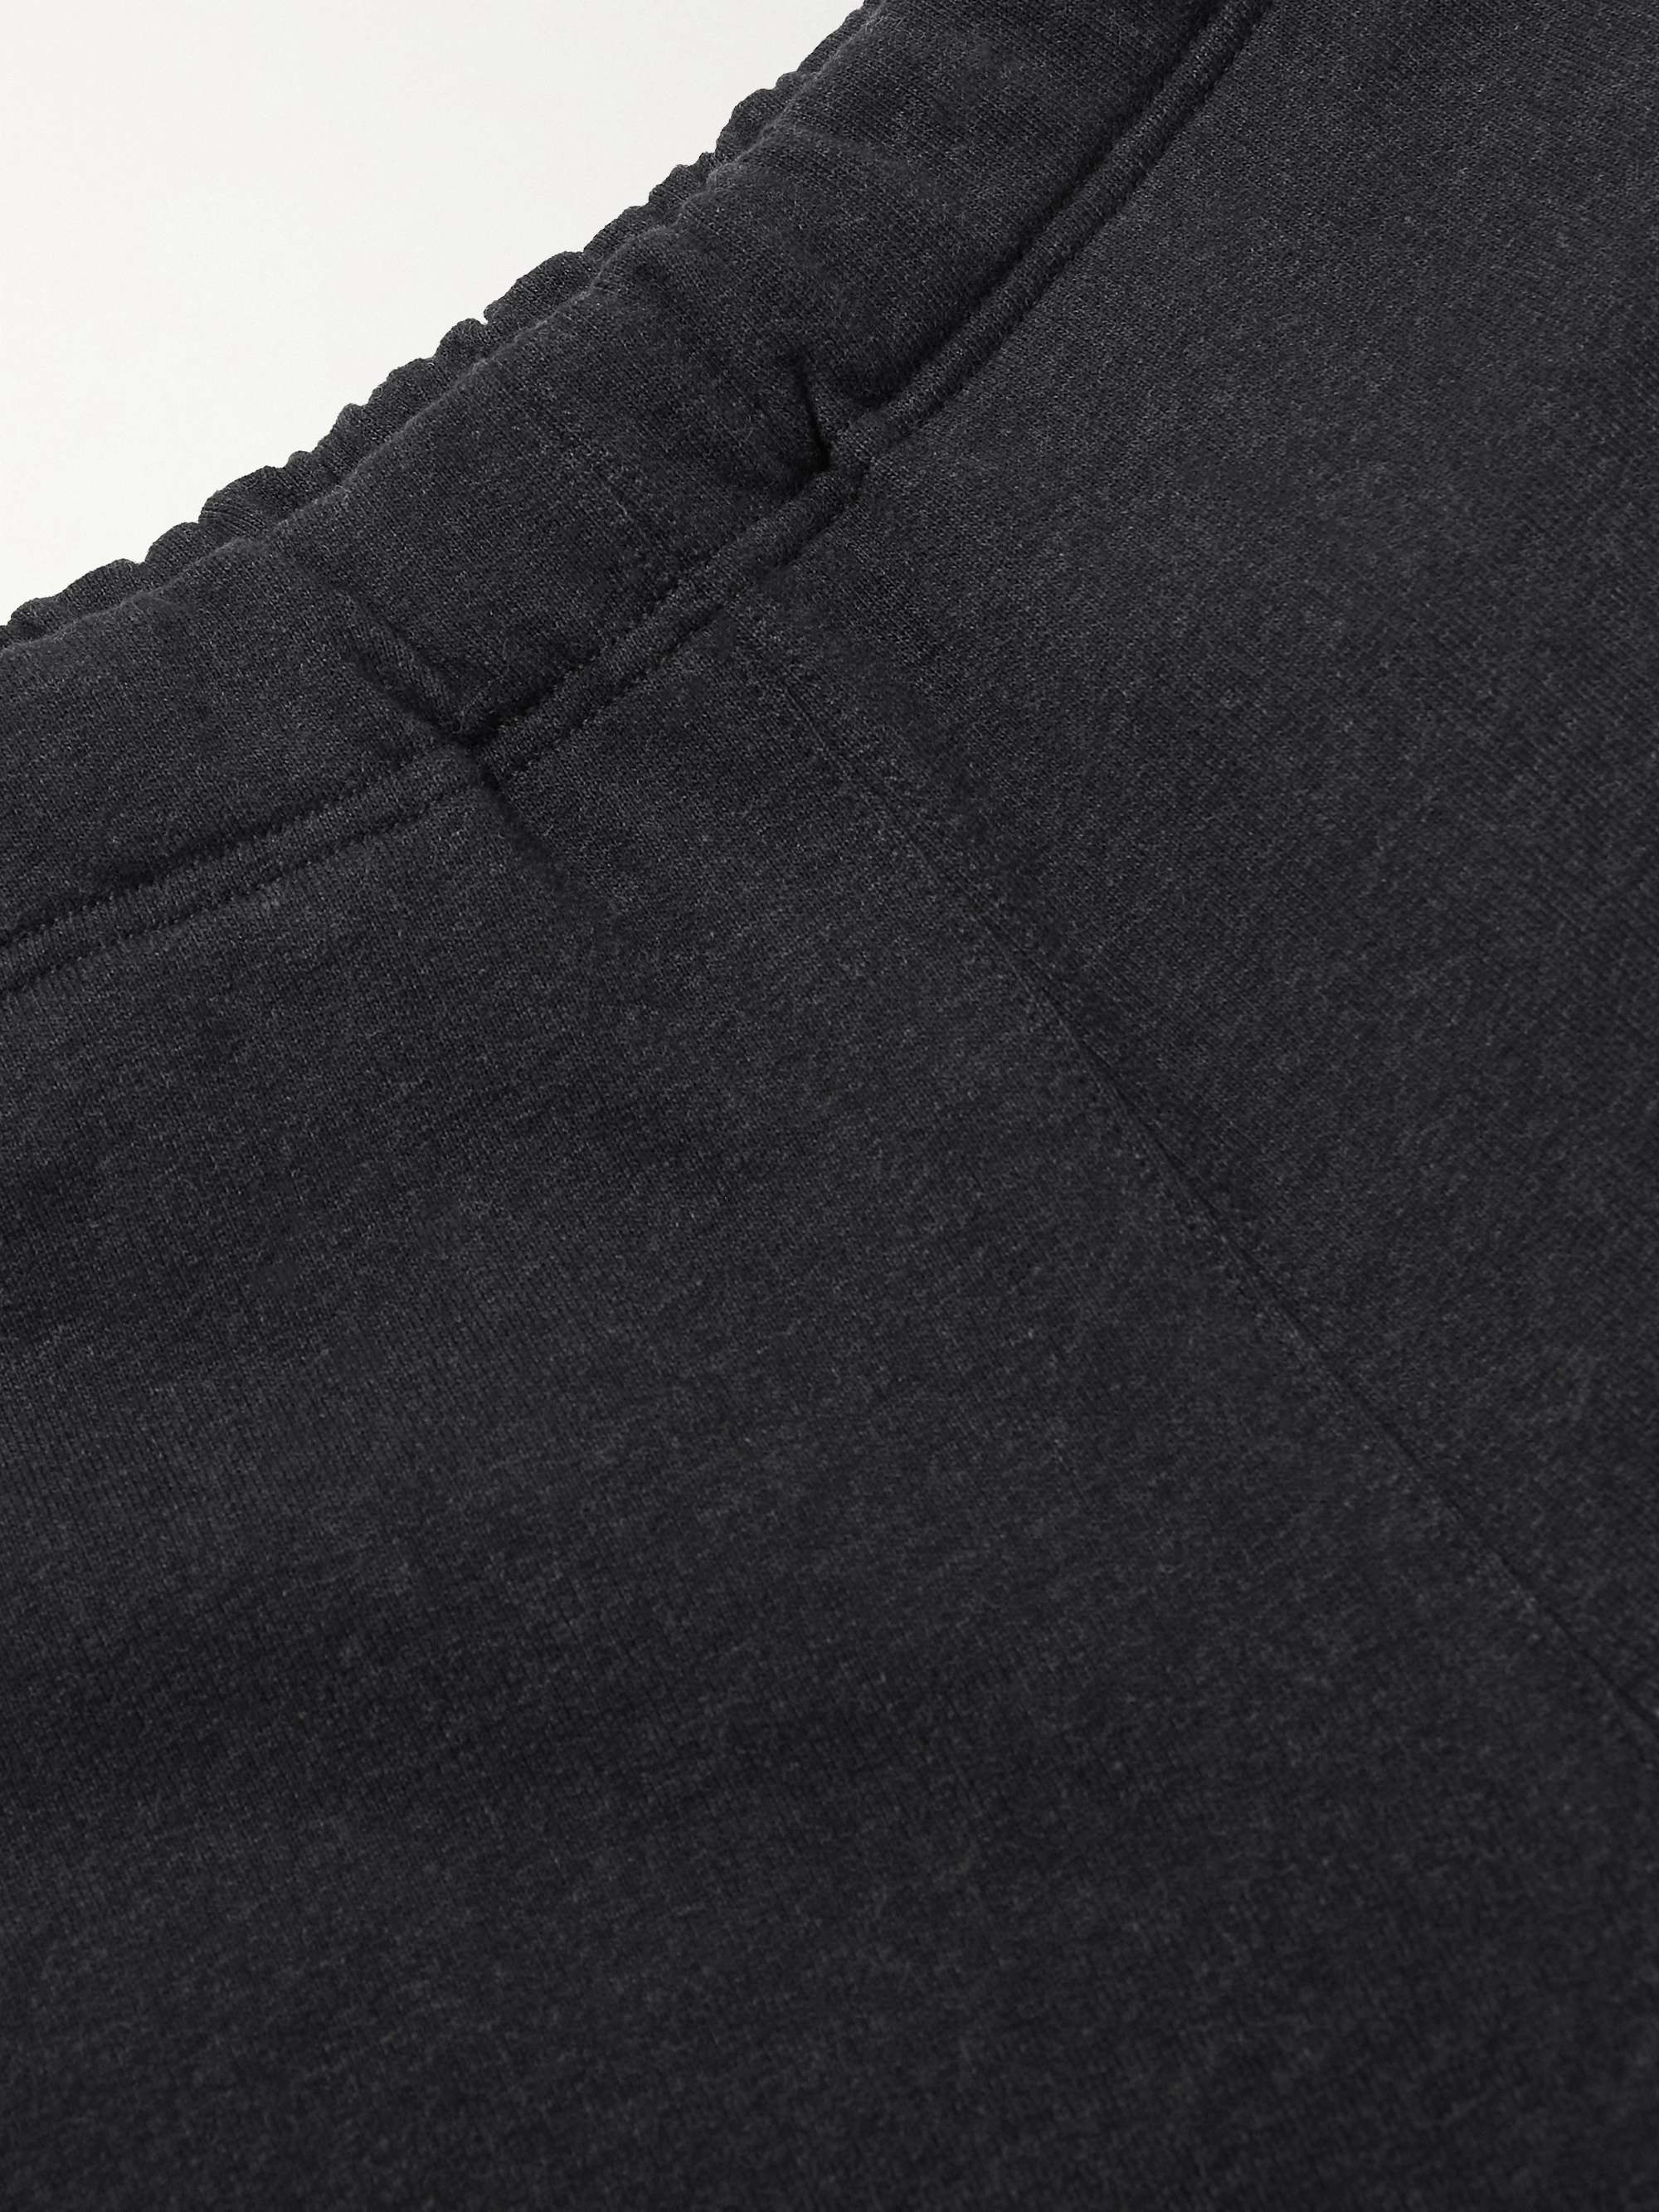 SNOW PEAK Tapered Recycled Cotton-Jersey Sweatpants